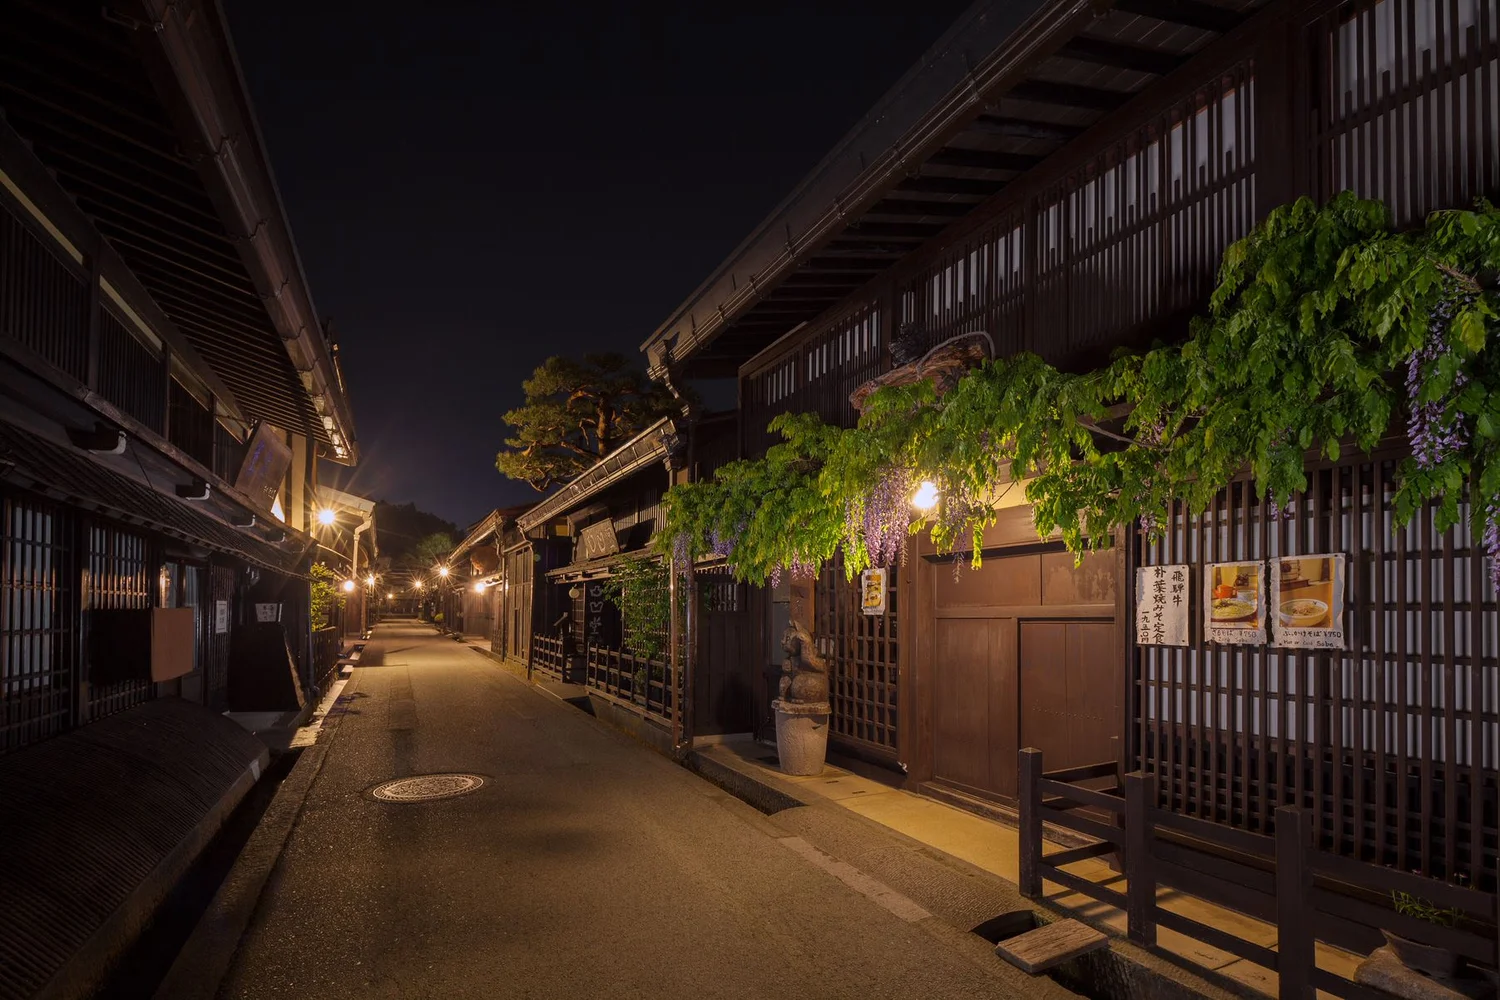 Take an Online Tour of Takayama, Gifu With a Local Guide